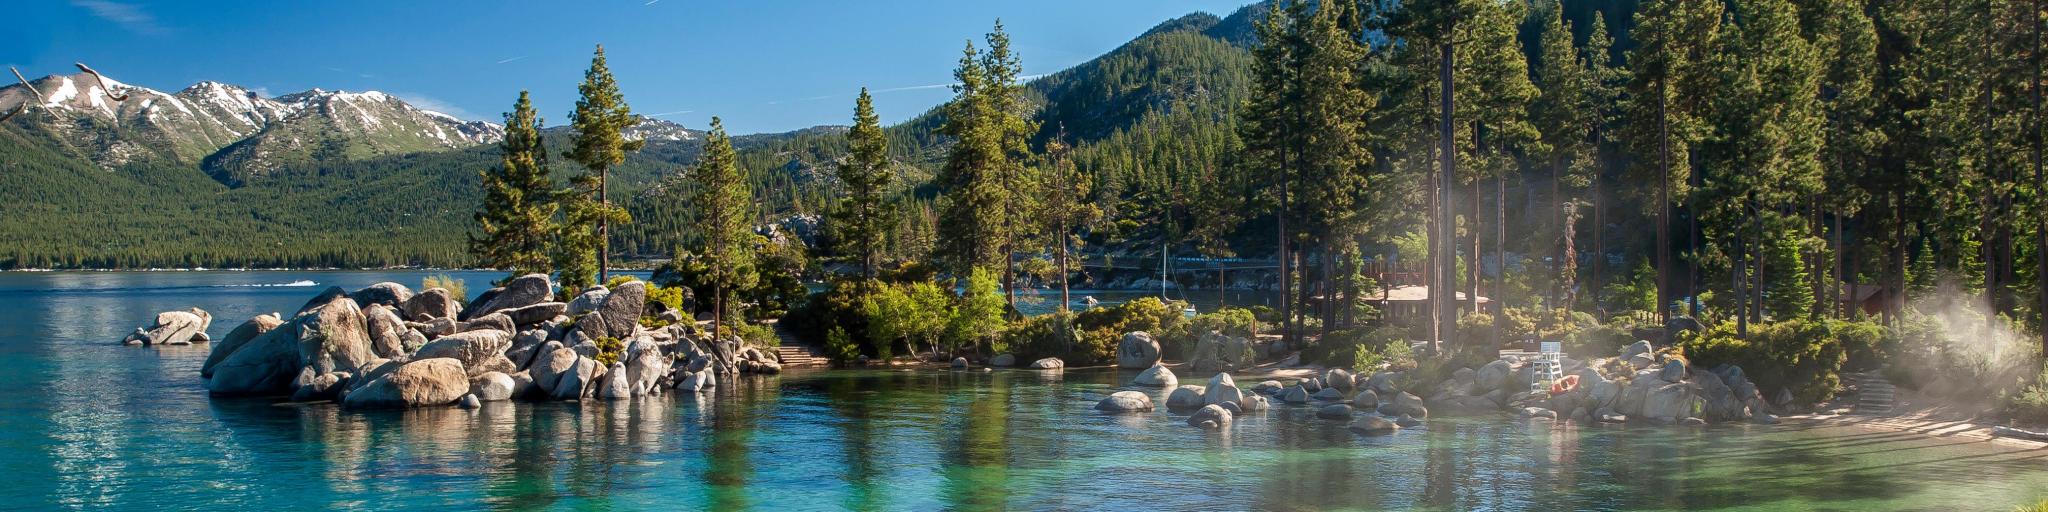 Clear emerald water with rocks, pine trees and mountains at Sand Harbor SP, Lake Tahoe, Nevada